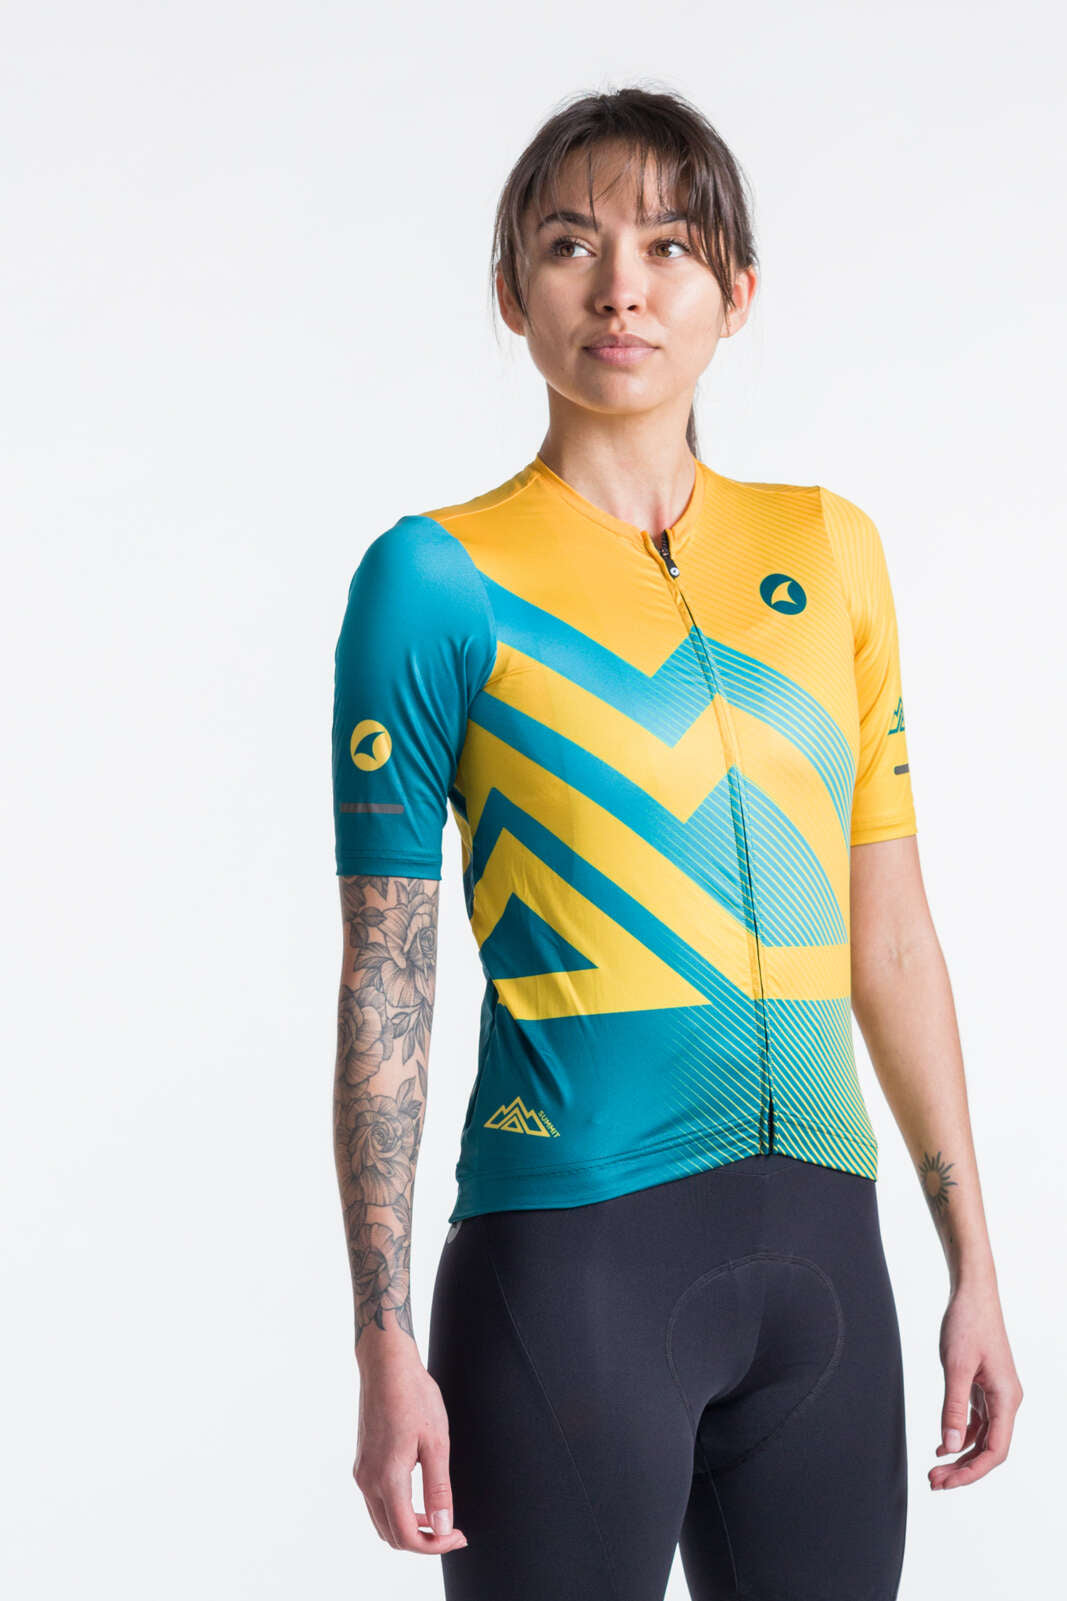 Women's Best Orange & Teal Cycling Jersey - Summit Front View